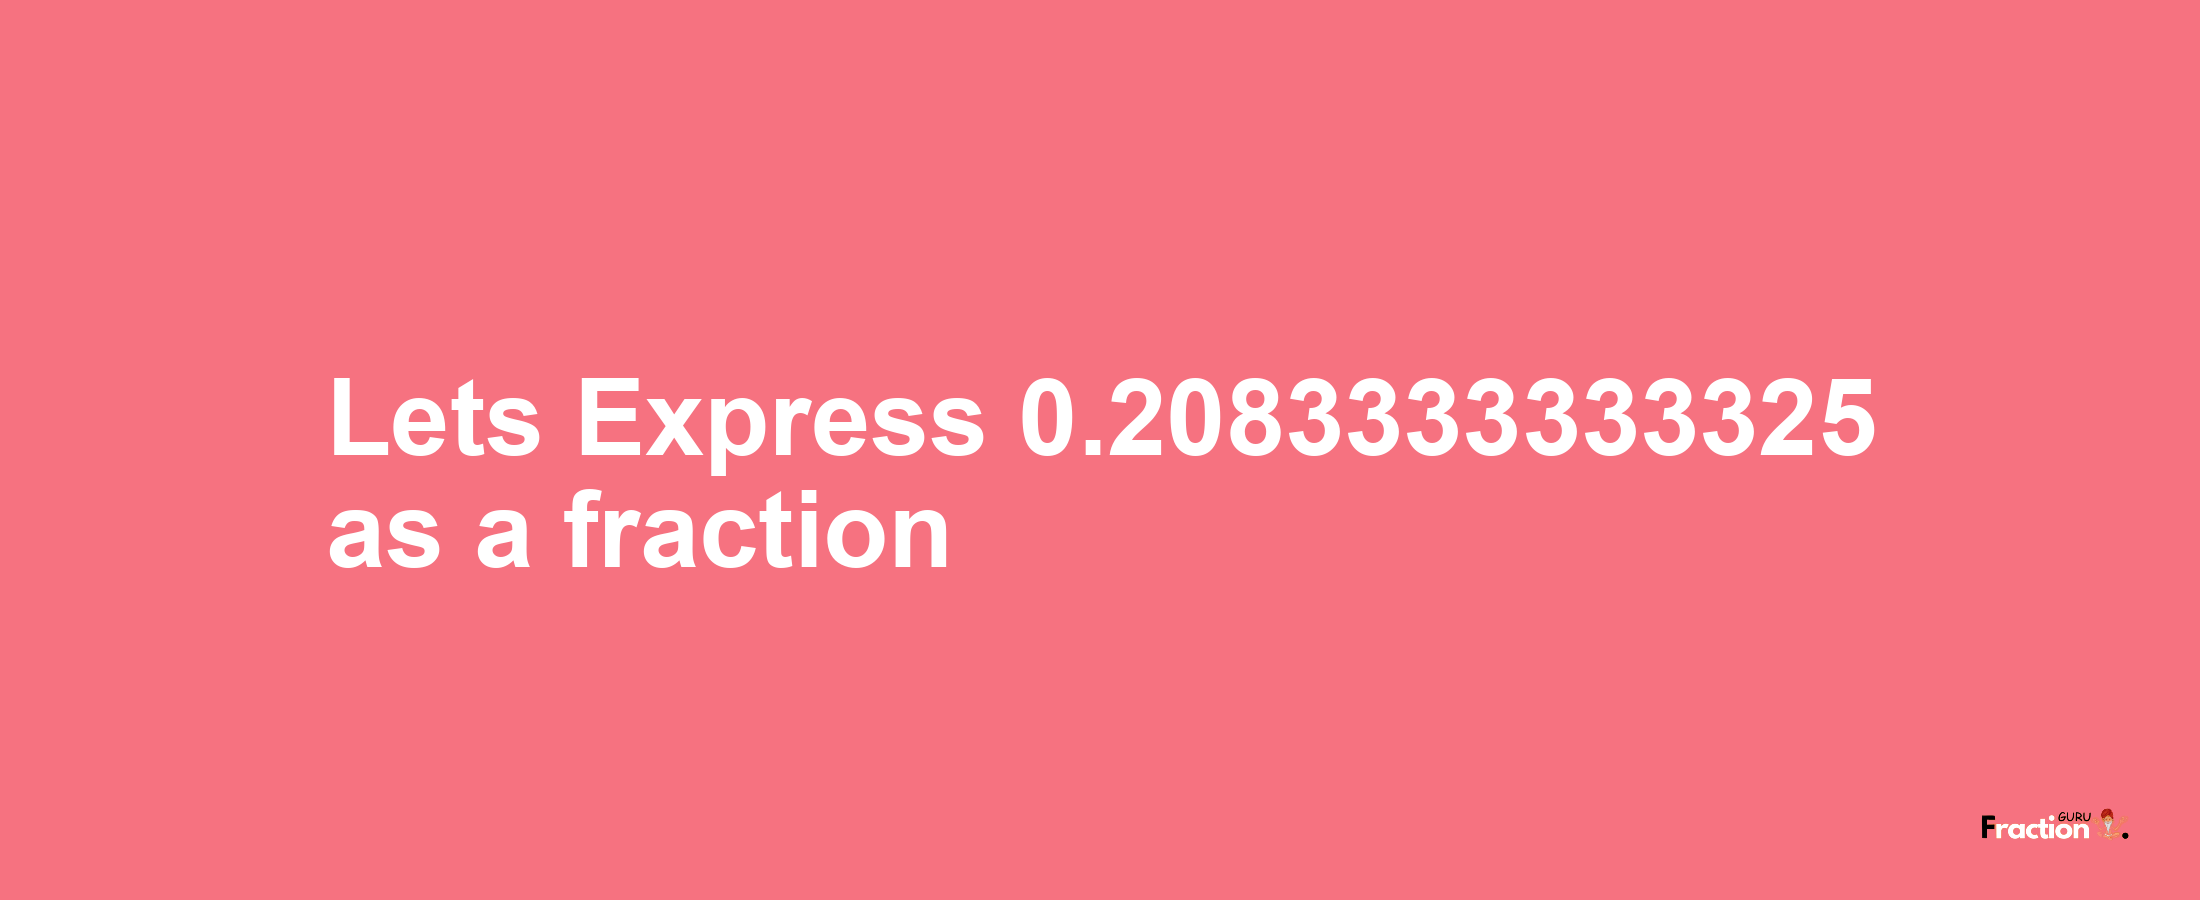 Lets Express 0.2083333333325 as afraction